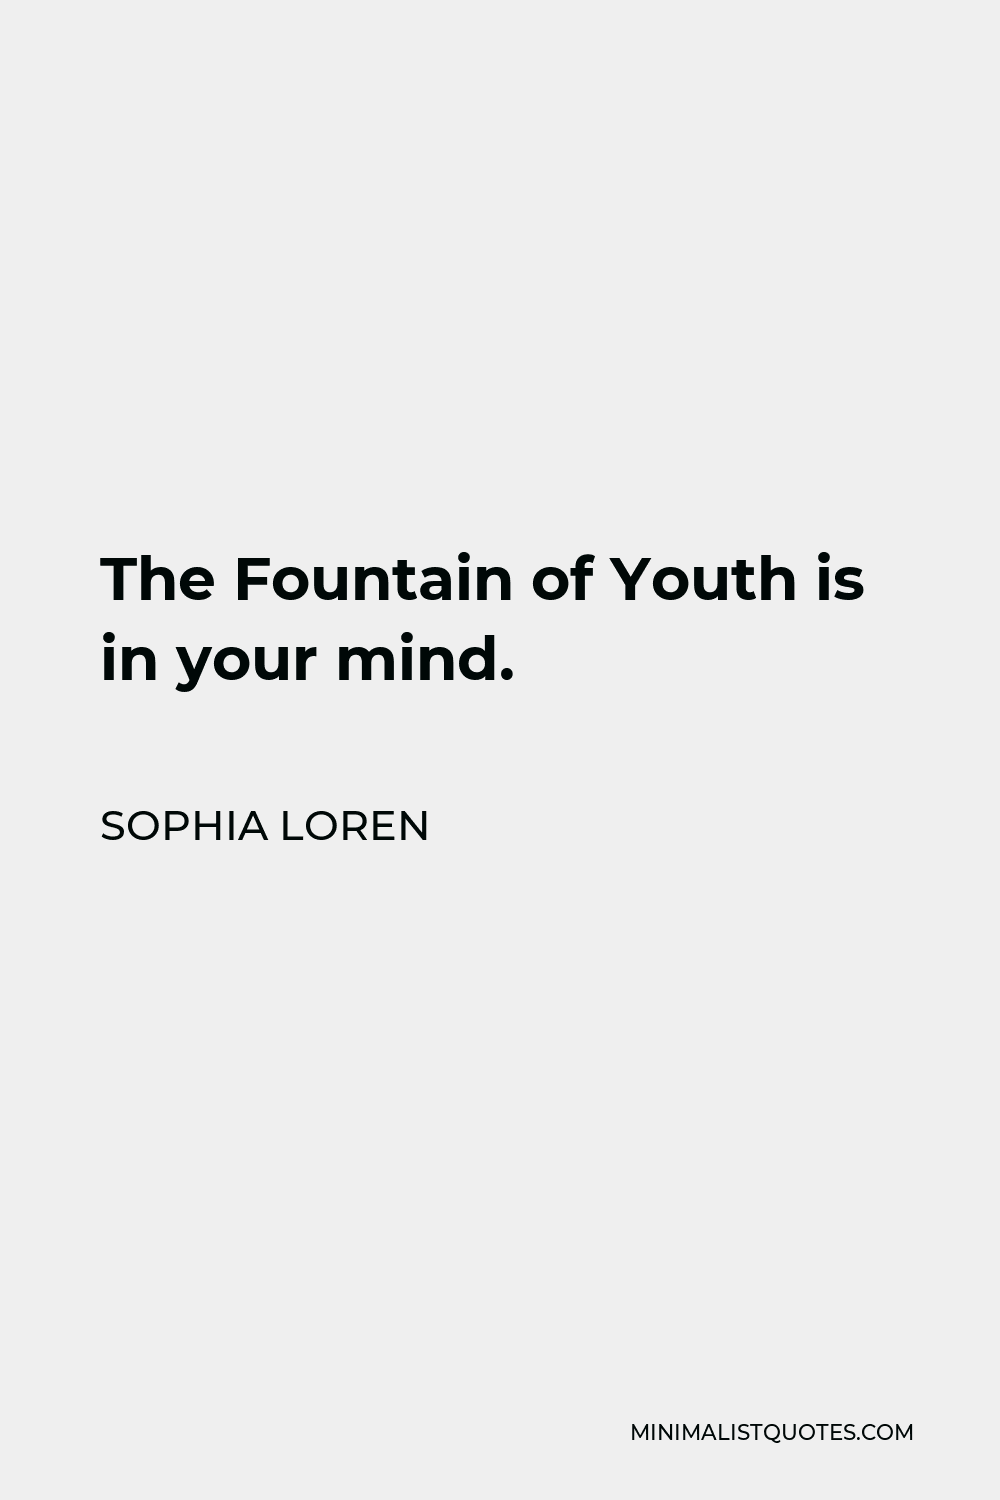 Sophia Loren Quote - The Fountain of Youth is in your mind.